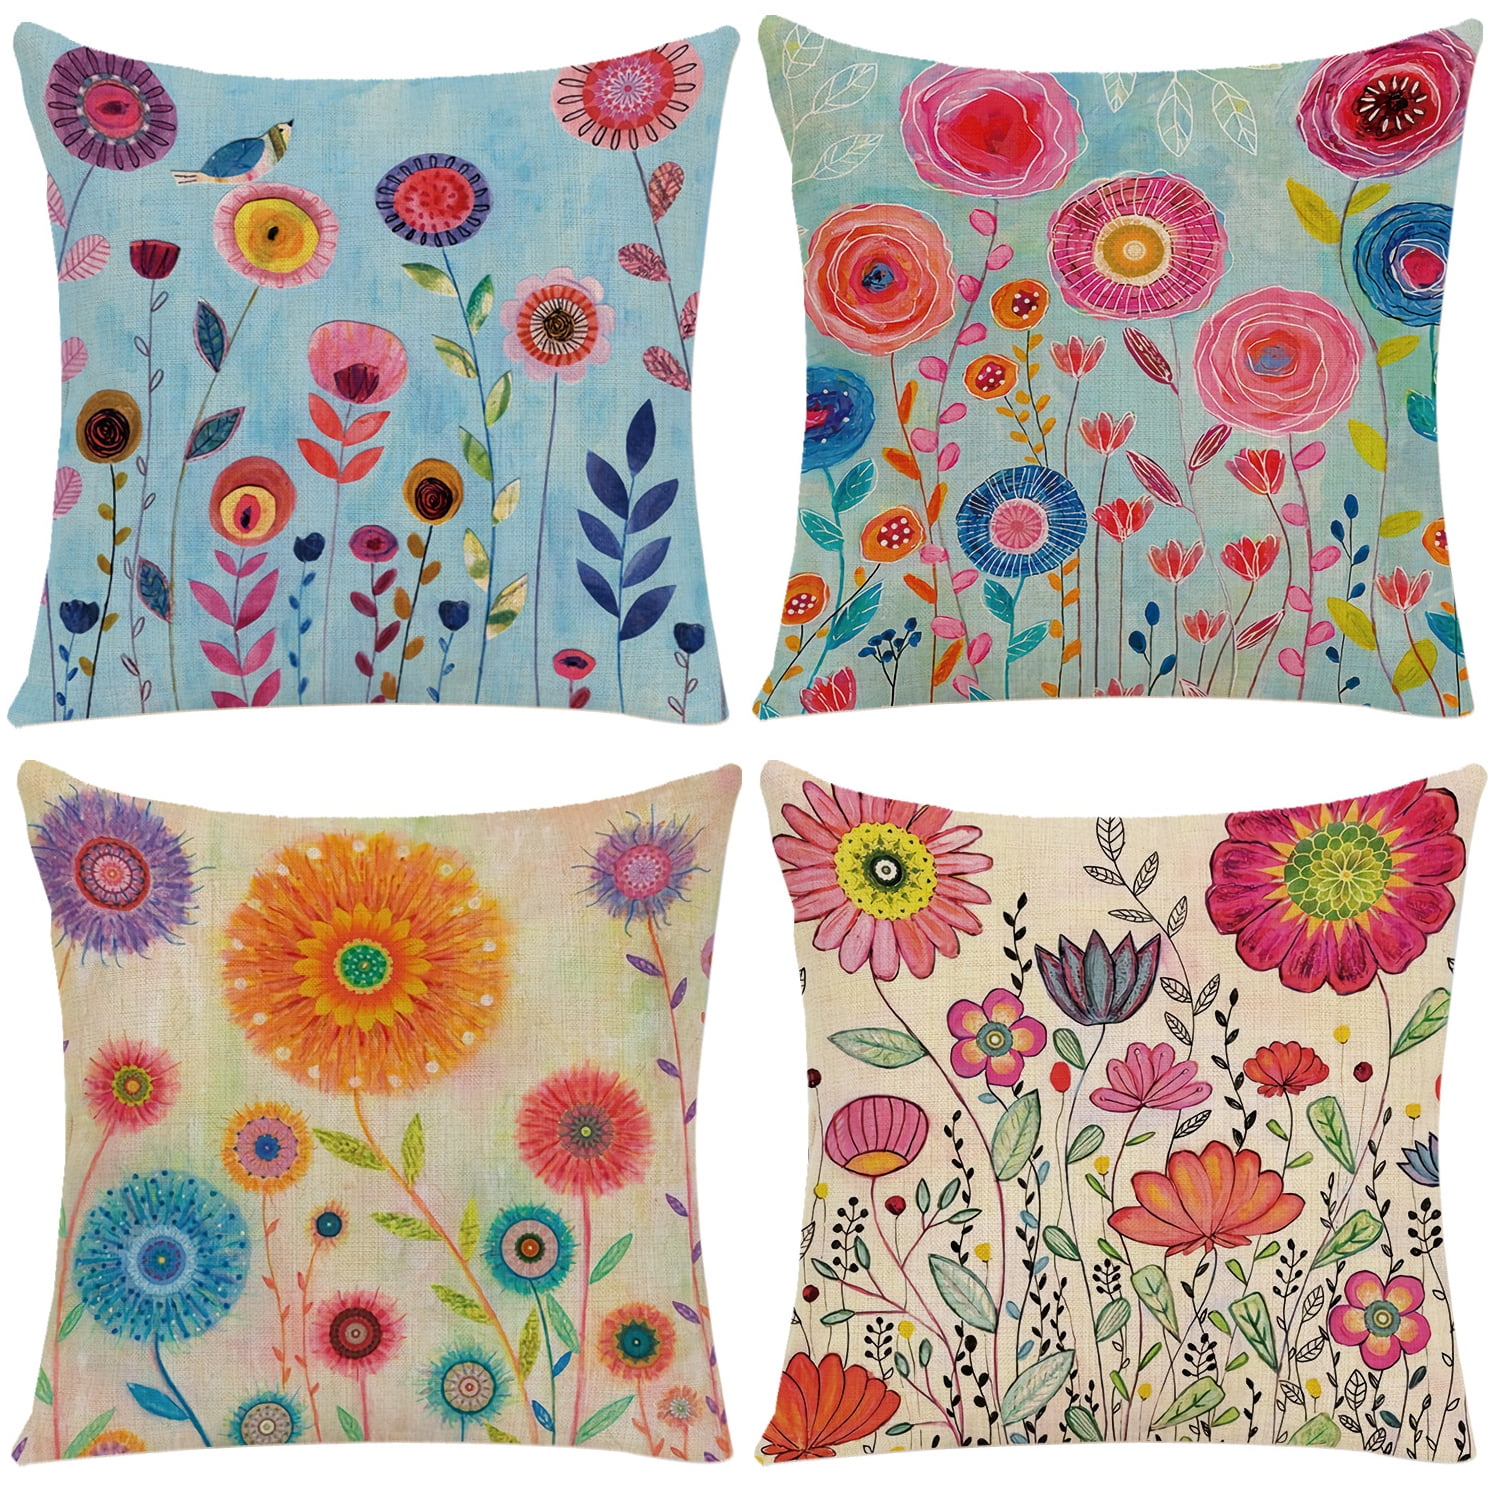 Artiflr Spring Summer Throw Pillow Covers 18x18 Inch, Set of 4 Flowers  Pillow Cases Decorative Cushion Cases Cushion Cover, Flowers Seasonal